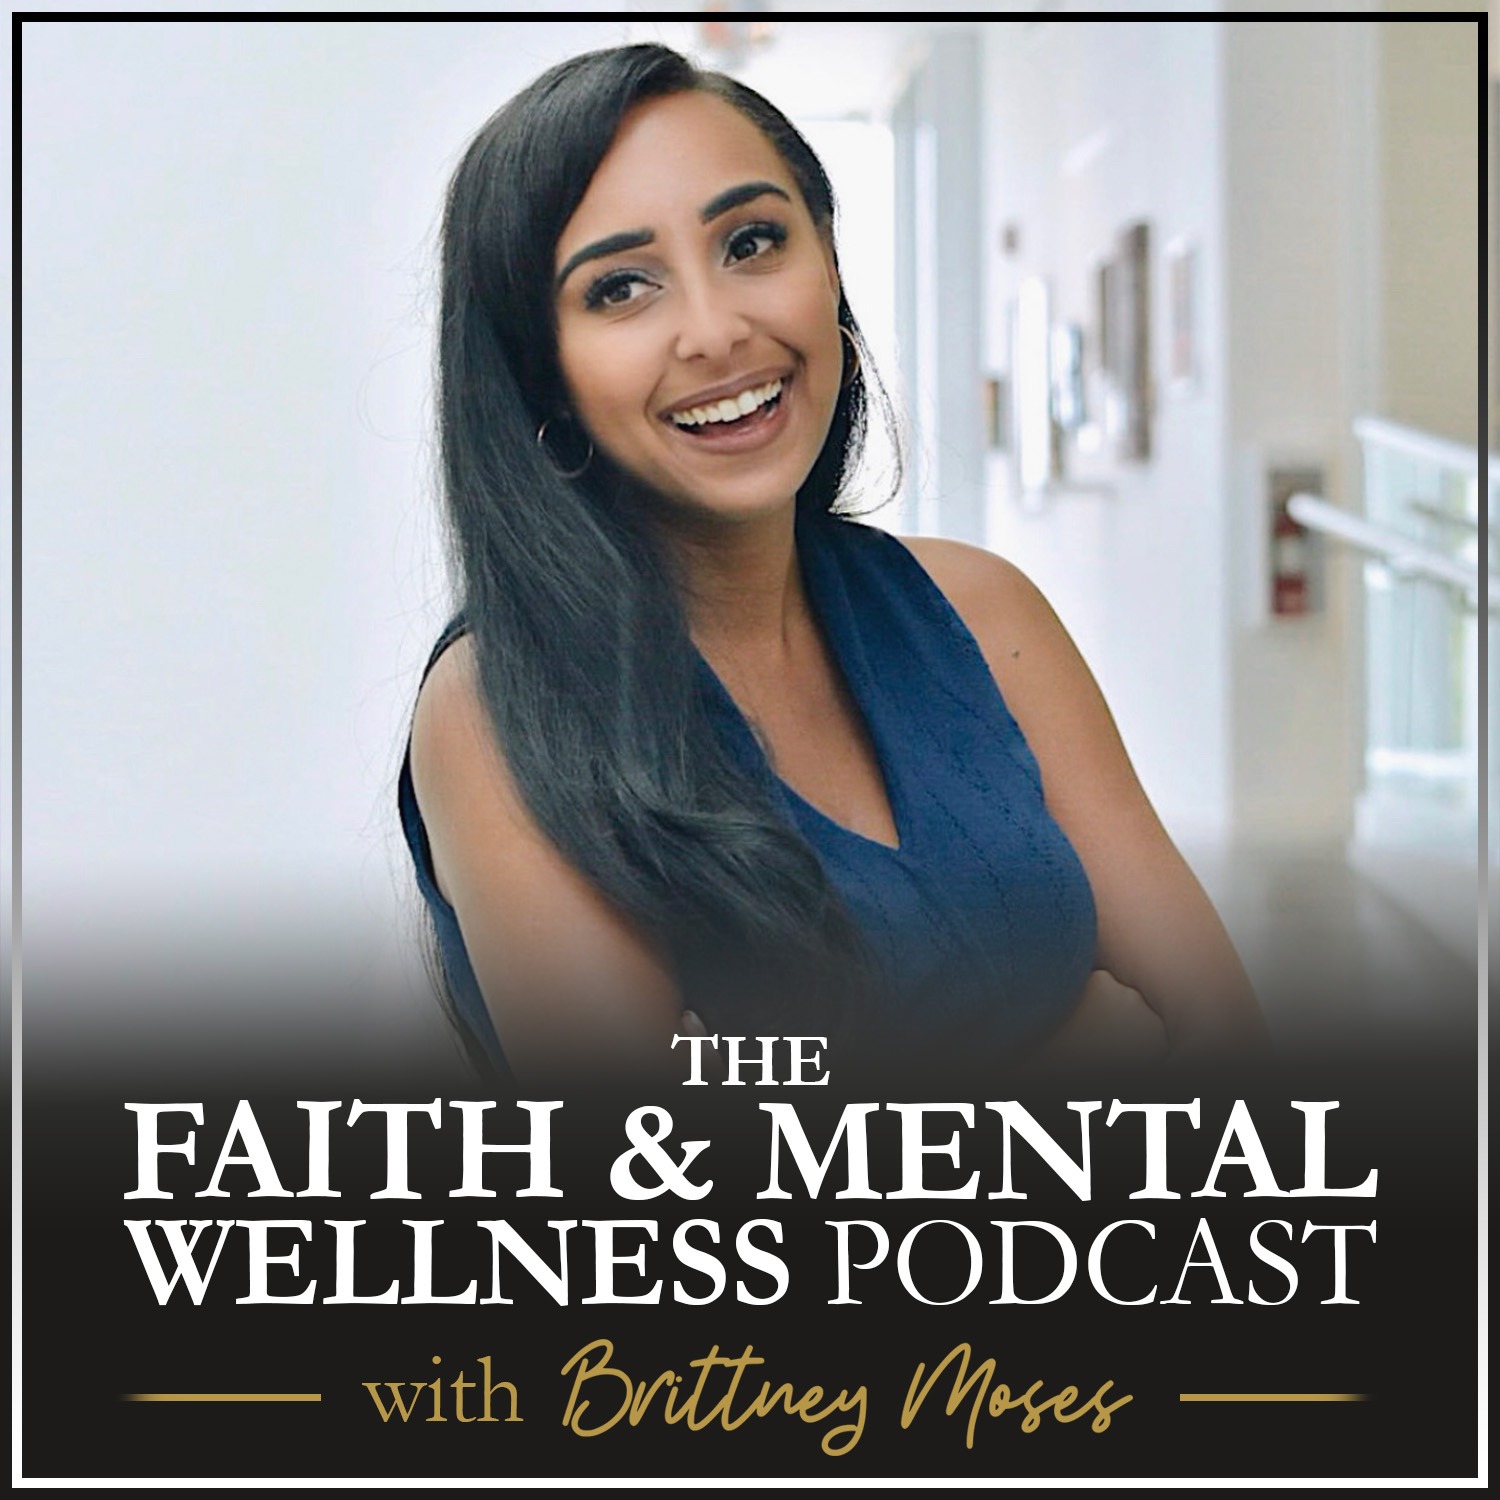 077: How to Start Caring for Your Hormonal Health with Isabel Garza